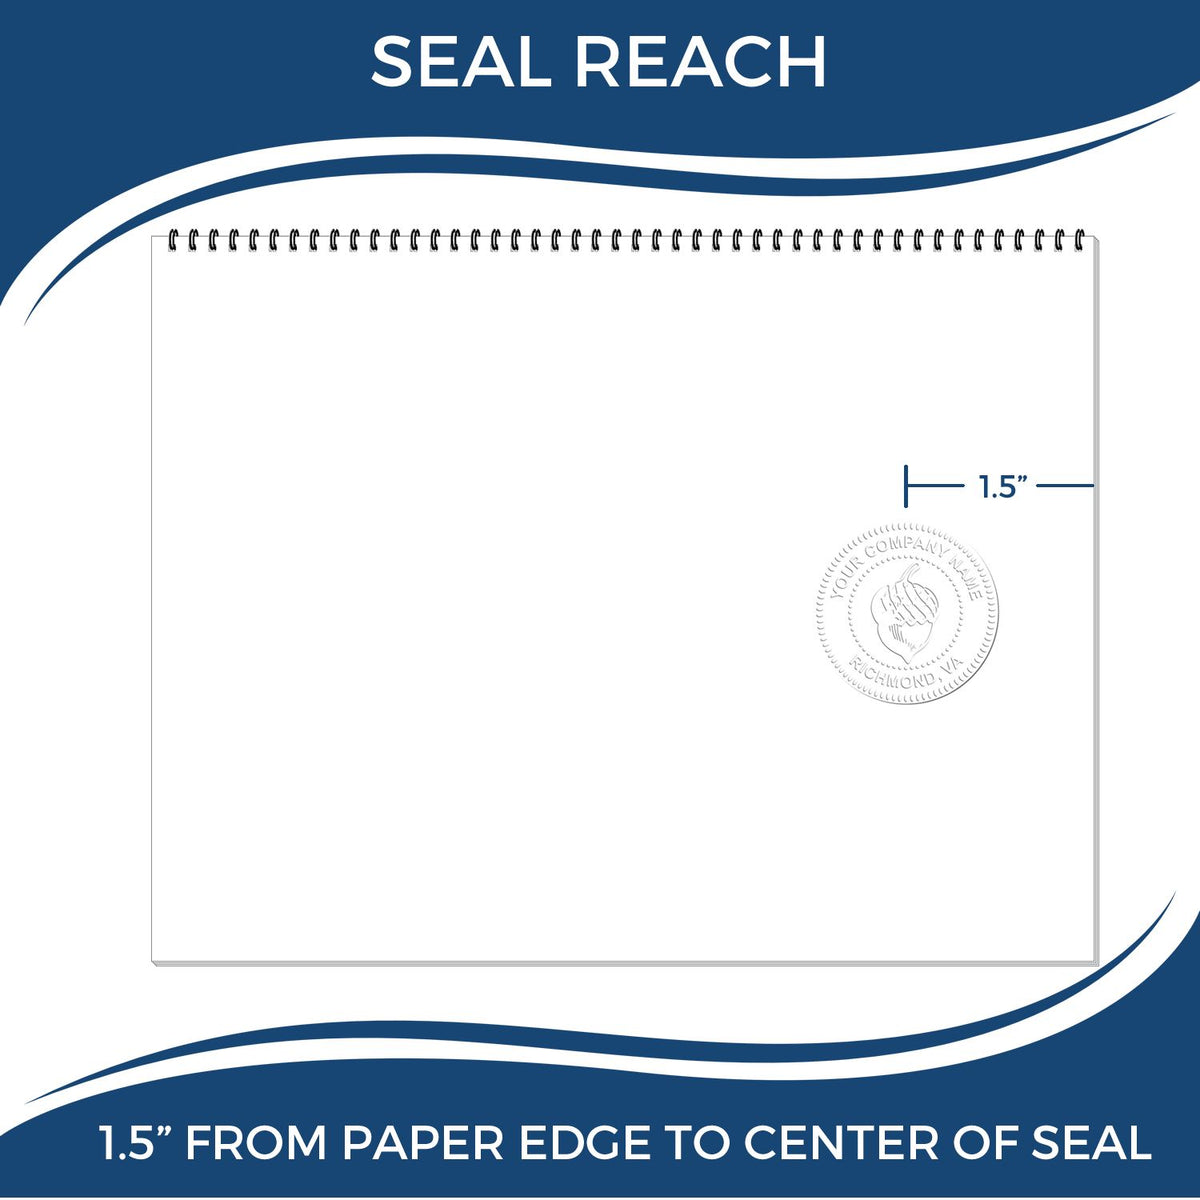 An infographic showing the seal reach which is represented by a ruler and a miniature seal image of the Gift Hawaii Architect Seal